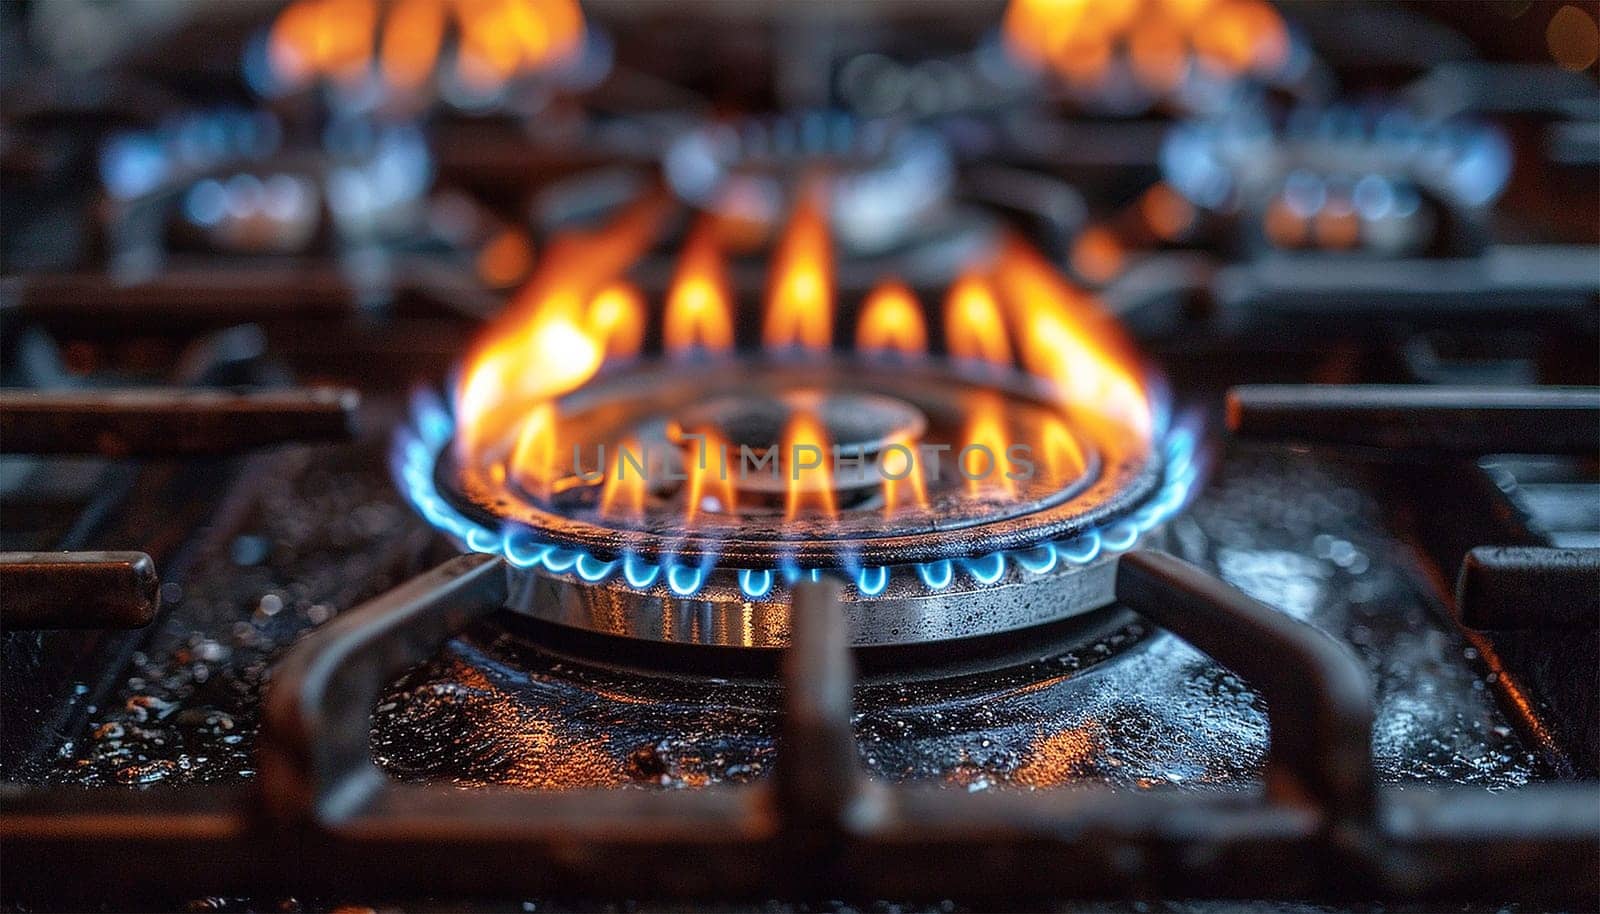 Burning gas stove. Closeup shot of blue fire from domestic kitchen stove top. Gas cooker with burning flames of propane gas. Industrial resources and economy concept. Kitchen gas flames burning